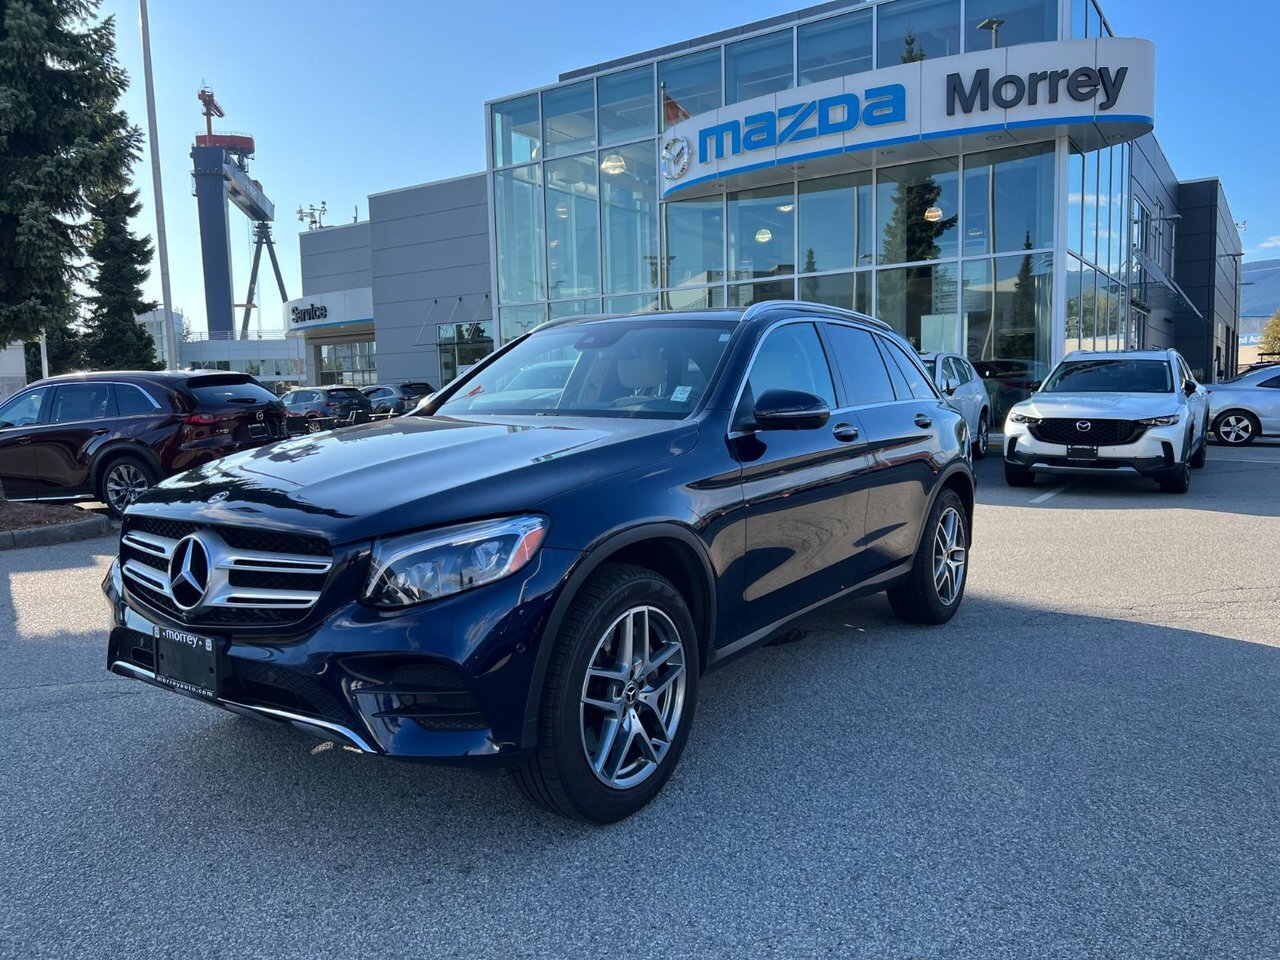 2019 Mercedes-Benz GLC300 4MATIC SUV German Luxury! Full of options! Come by